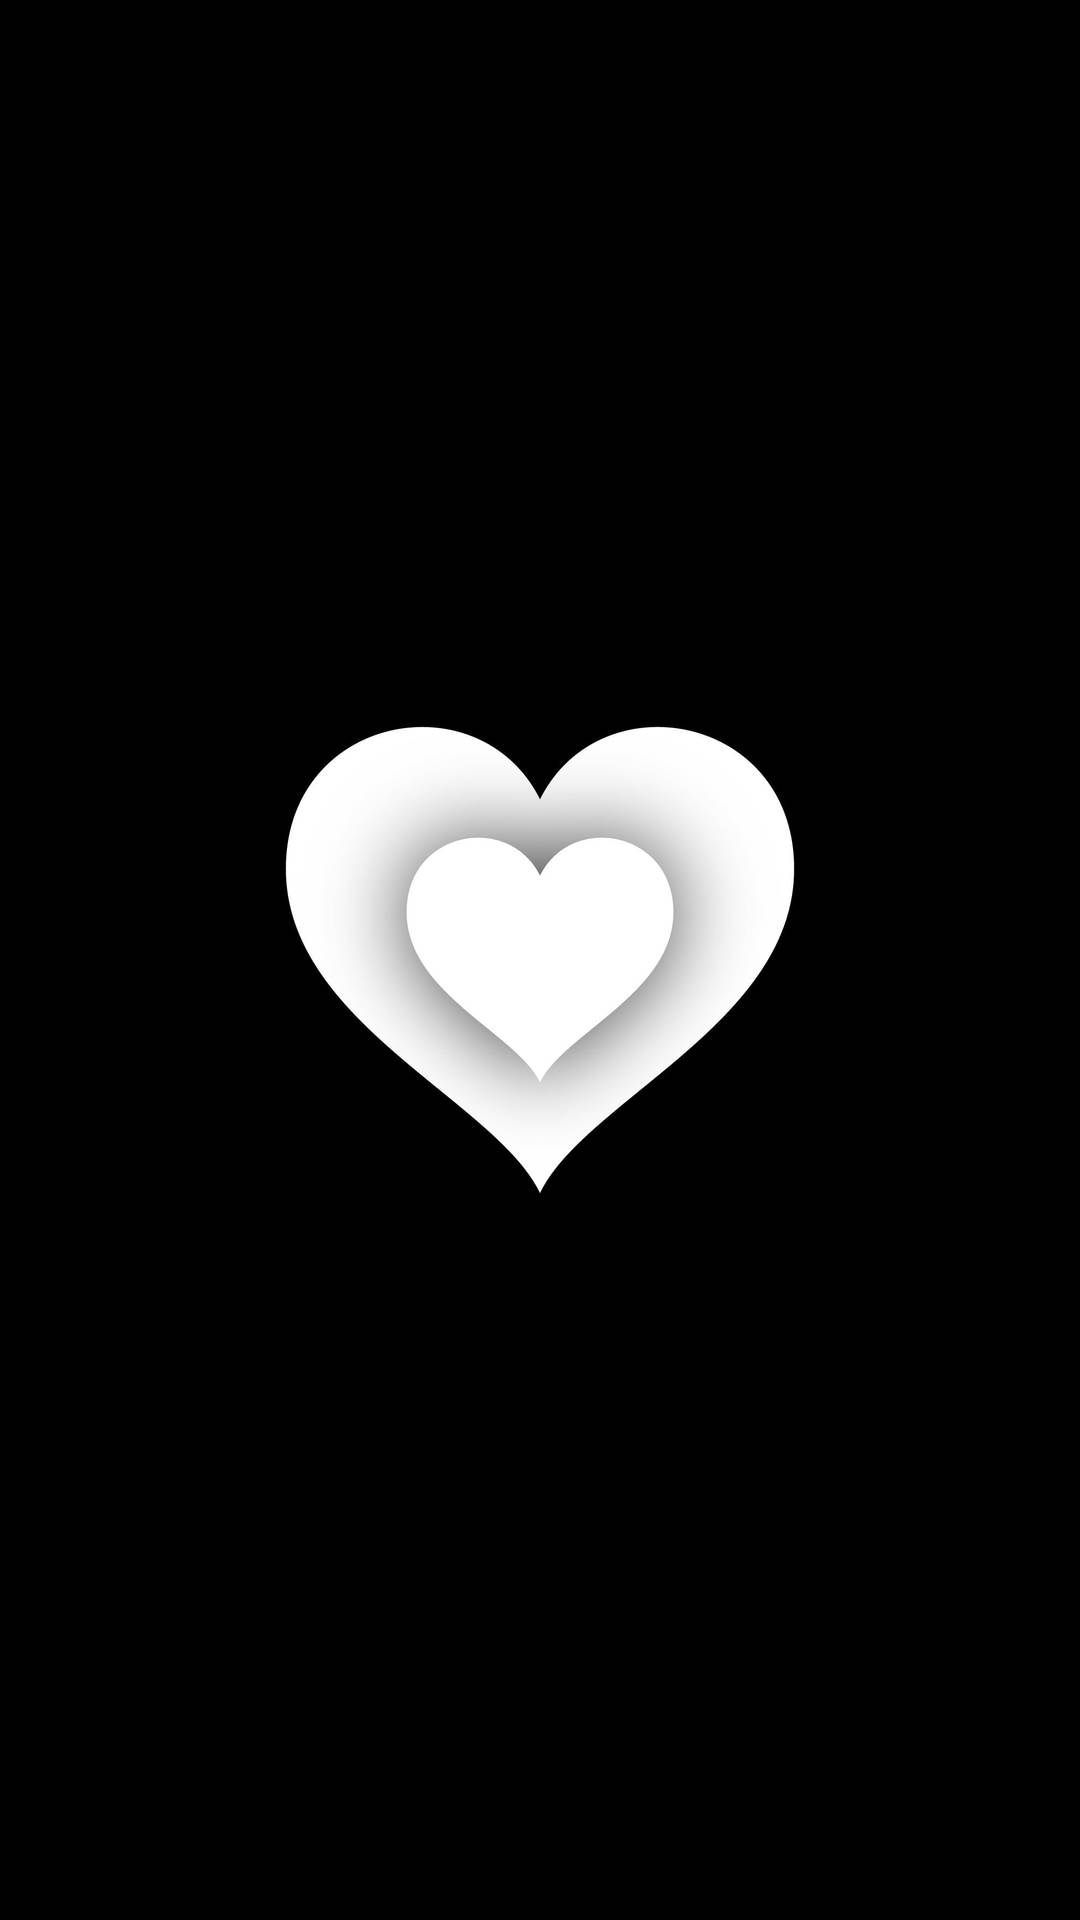 Layered Black And White Heart Wallpaper